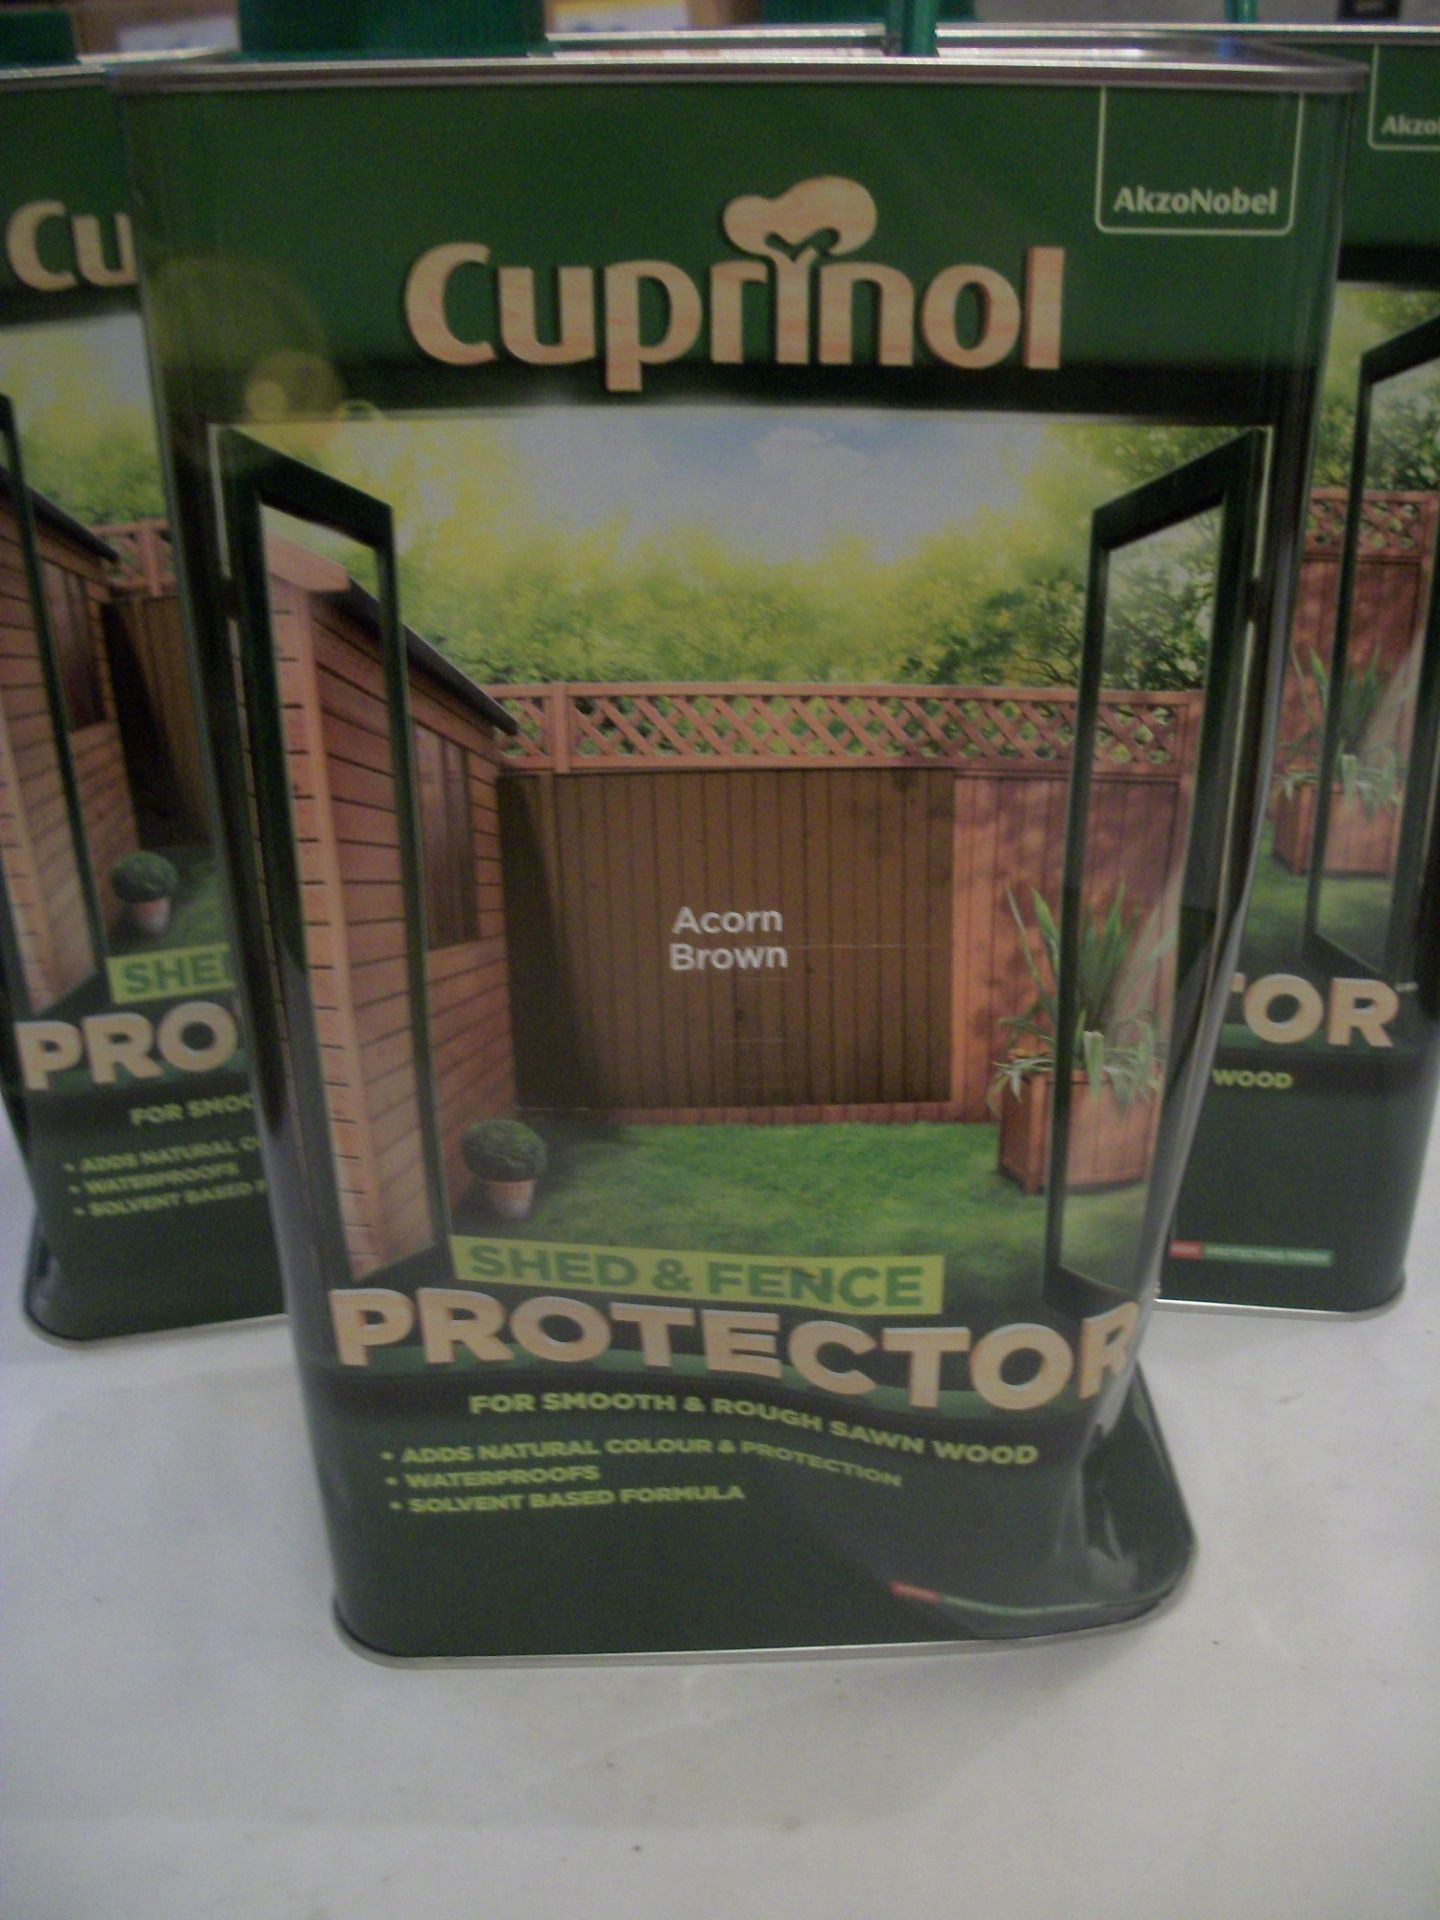 3 x Cuprinol Shed & Fence Protector Acorn Brown 5ltr RRP over £90 slightly dented